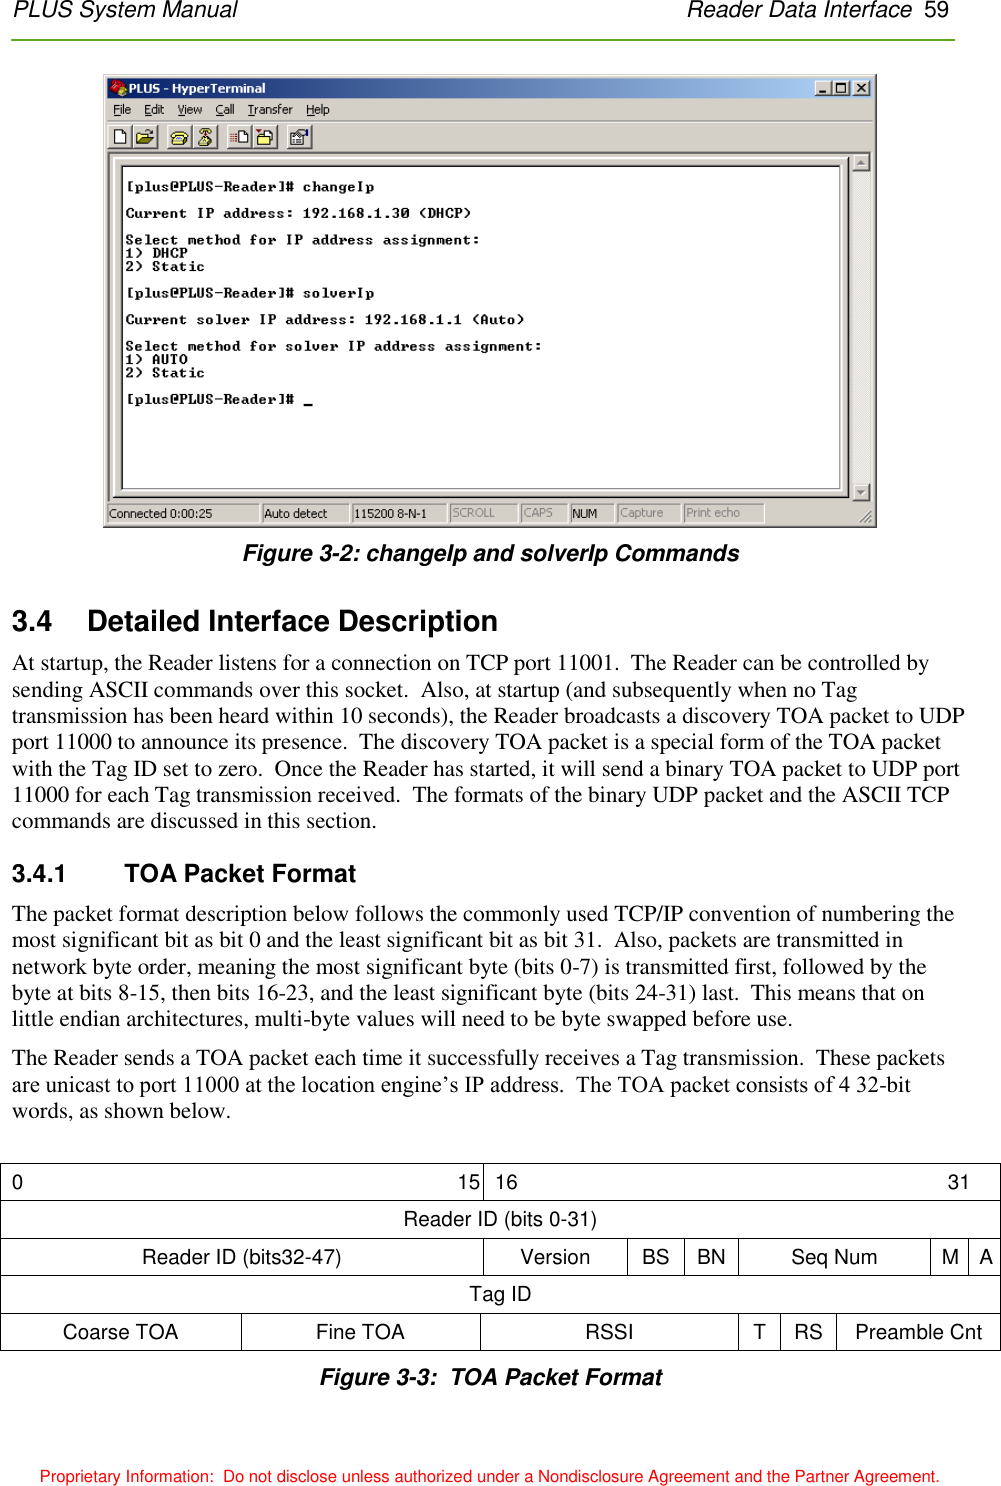 PLUS System Manual    Reader Data Interface  59 Proprietary Information:  Do not disclose unless authorized under a Nondisclosure Agreement and the Partner Agreement.  Figure 3-2: changeIp and solverIp Commands 3.4    Detailed Interface Description At startup, the Reader listens for a connection on TCP port 11001.  The Reader can be controlled by sending ASCII commands over this socket.  Also, at startup (and subsequently when no Tag transmission has been heard within 10 seconds), the Reader broadcasts a discovery TOA packet to UDP port 11000 to announce its presence.  The discovery TOA packet is a special form of the TOA packet with the Tag ID set to zero.  Once the Reader has started, it will send a binary TOA packet to UDP port 11000 for each Tag transmission received.  The formats of the binary UDP packet and the ASCII TCP commands are discussed in this section. 3.4.1    TOA Packet Format The packet format description below follows the commonly used TCP/IP convention of numbering the most significant bit as bit 0 and the least significant bit as bit 31.  Also, packets are transmitted in network byte order, meaning the most significant byte (bits 0-7) is transmitted first, followed by the byte at bits 8-15, then bits 16-23, and the least significant byte (bits 24-31) last.  This means that on little endian architectures, multi-byte values will need to be byte swapped before use. The Reader sends a TOA packet each time it successfully receives a Tag transmission.  These packets are unicast to port 11000 at the location engine’s IP address.  The TOA packet consists of 4 32-bit words, as shown below.  0  15 16 31 Reader ID (bits 0-31) Reader ID (bits32-47) Version BS BN Seq Num M A Tag ID Coarse TOA Fine TOA RSSI T RS Preamble Cnt  Figure 3-3:  TOA Packet Format 